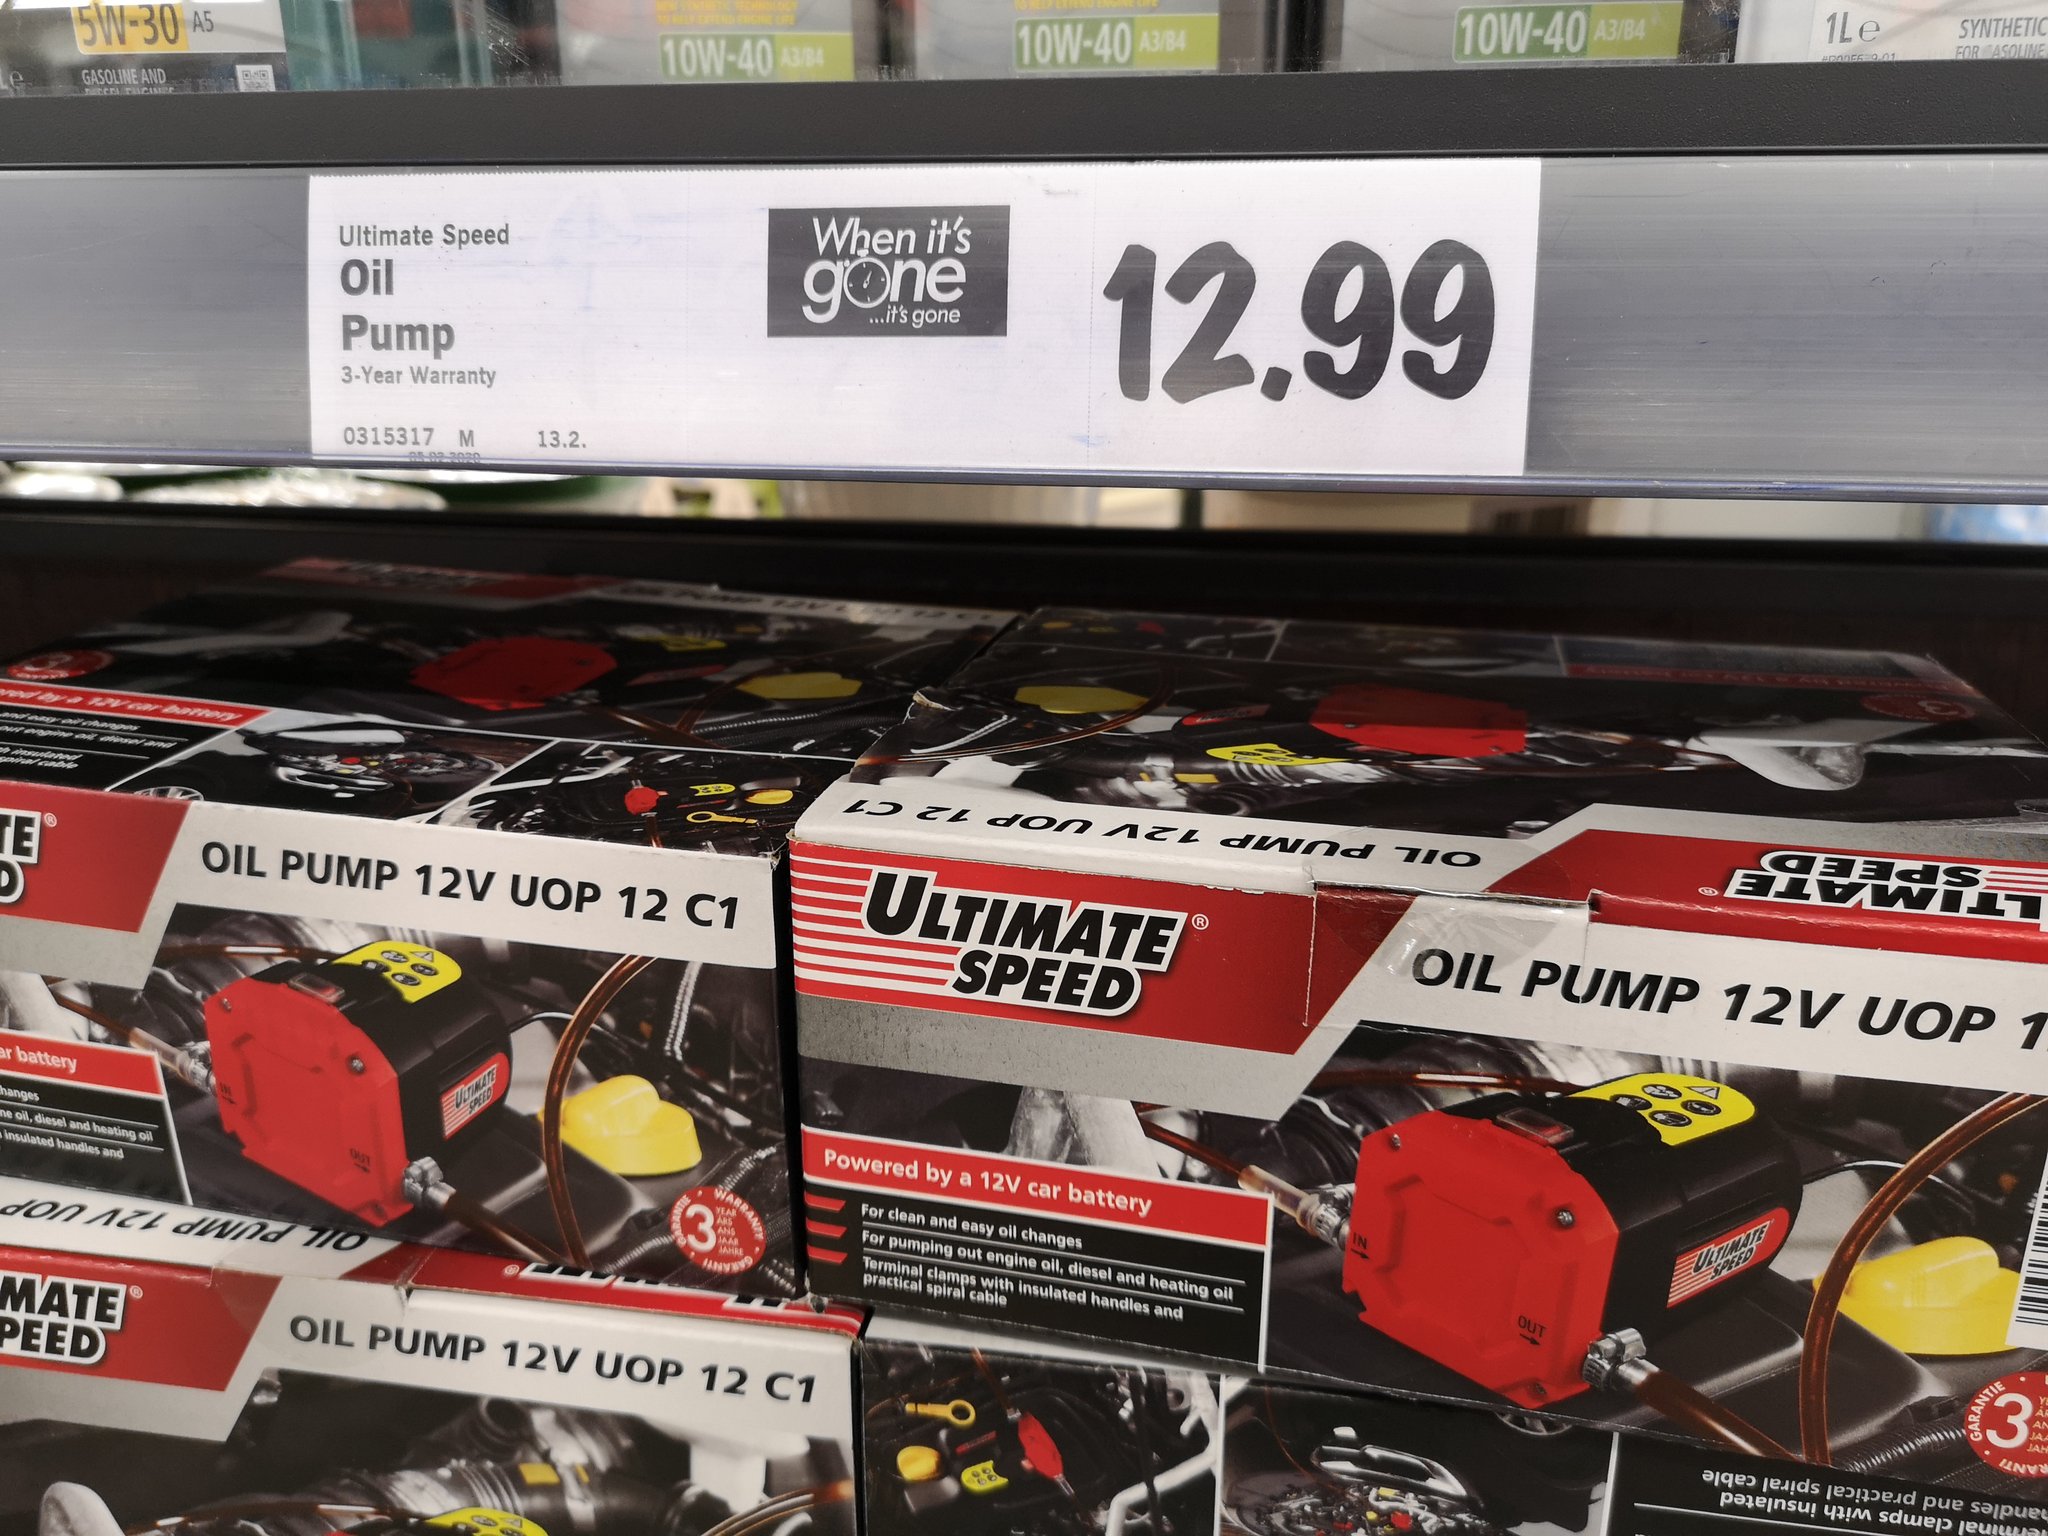 Lewis Kingston on Twitter: "Lidl is offering these 12V electric oil pumps the moment. They're good for cutting down some of the and grief of oil changes. It's aways useful